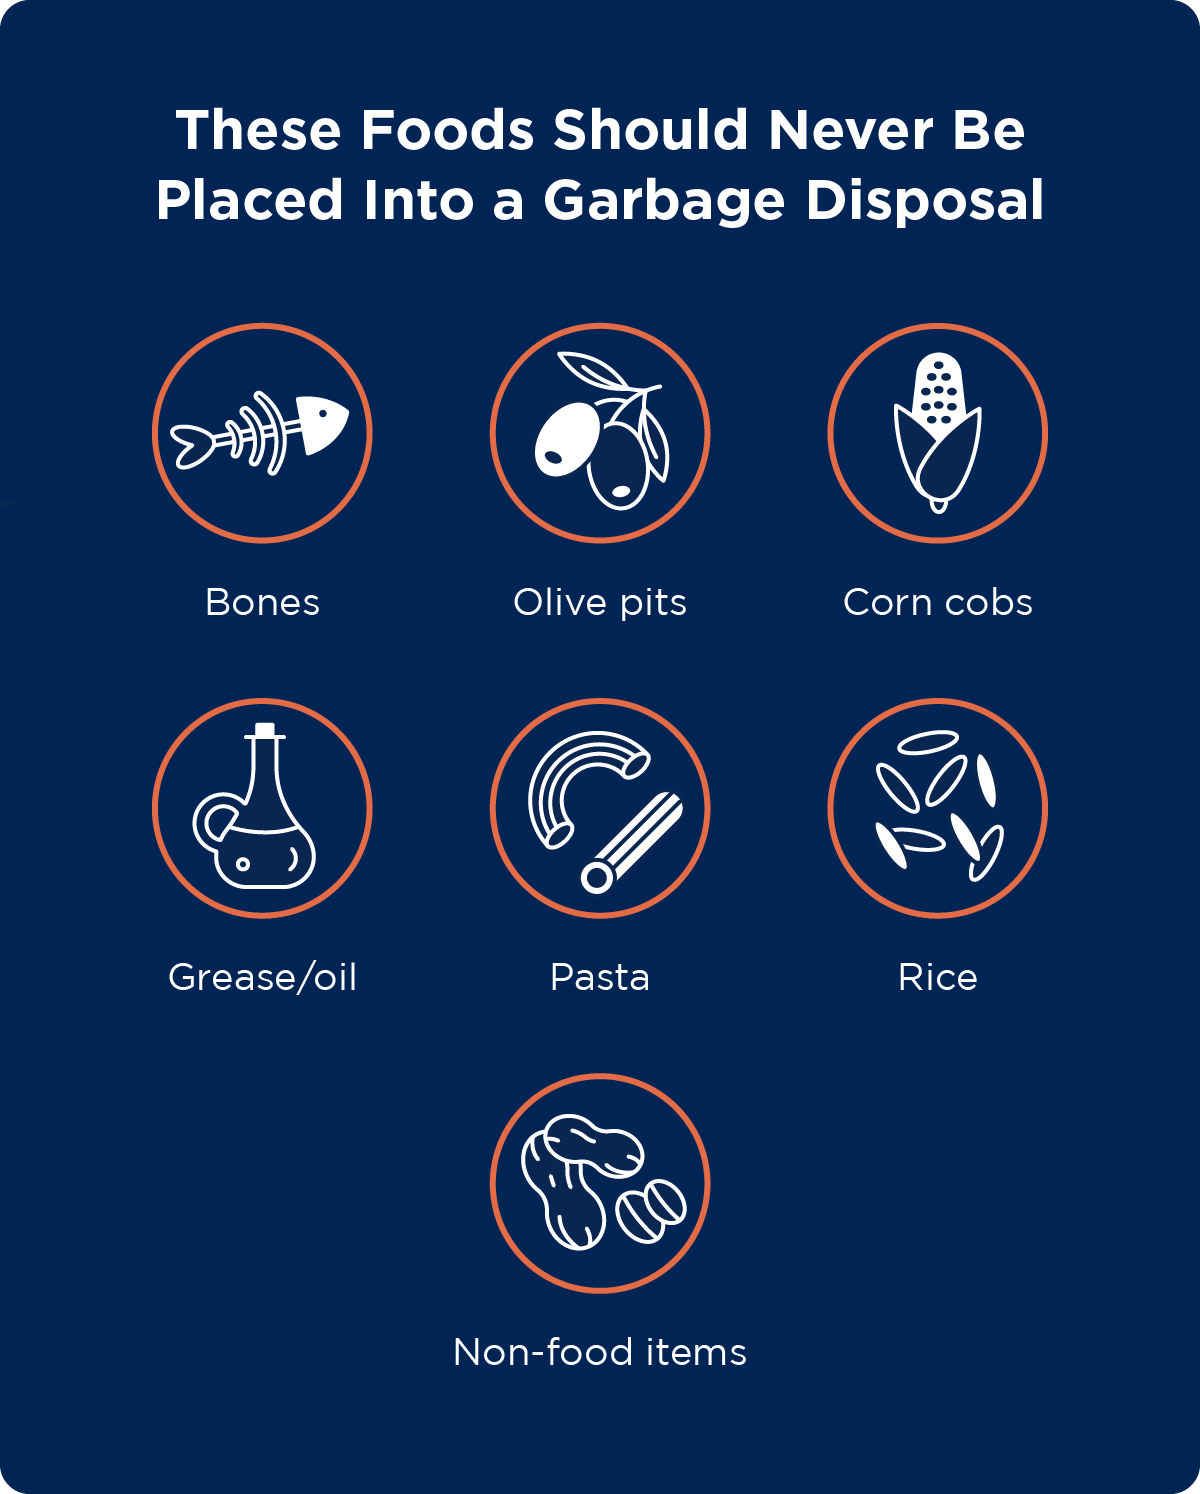 Seven foods that should never be placed into a garbage disposal.